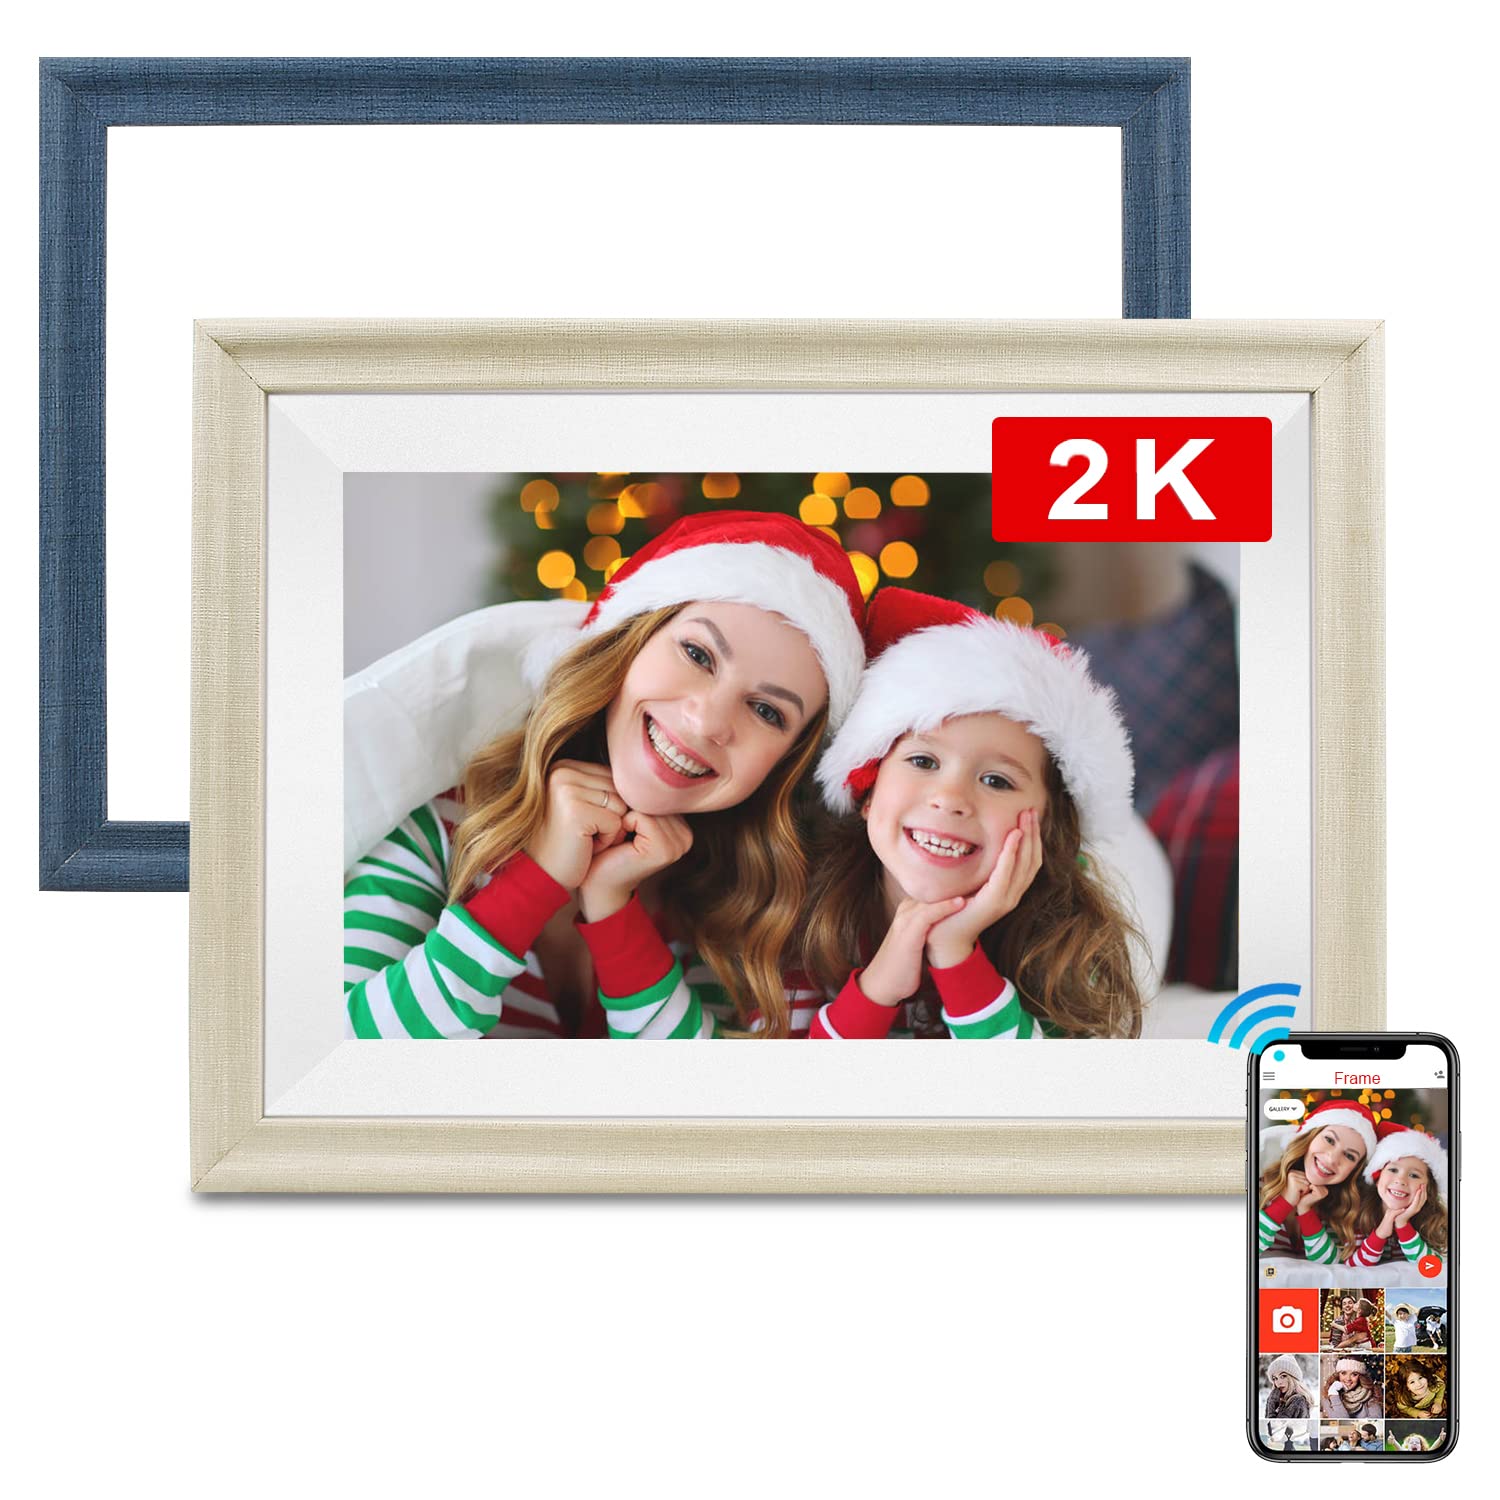 Frameo 8 Inch WiFi Digital Photo Frame with 2k IPS Touch Screen HD Disply,Built-in 16GB Storage,Auto-Rotate, Instant Share Photos and Videos via Fr...